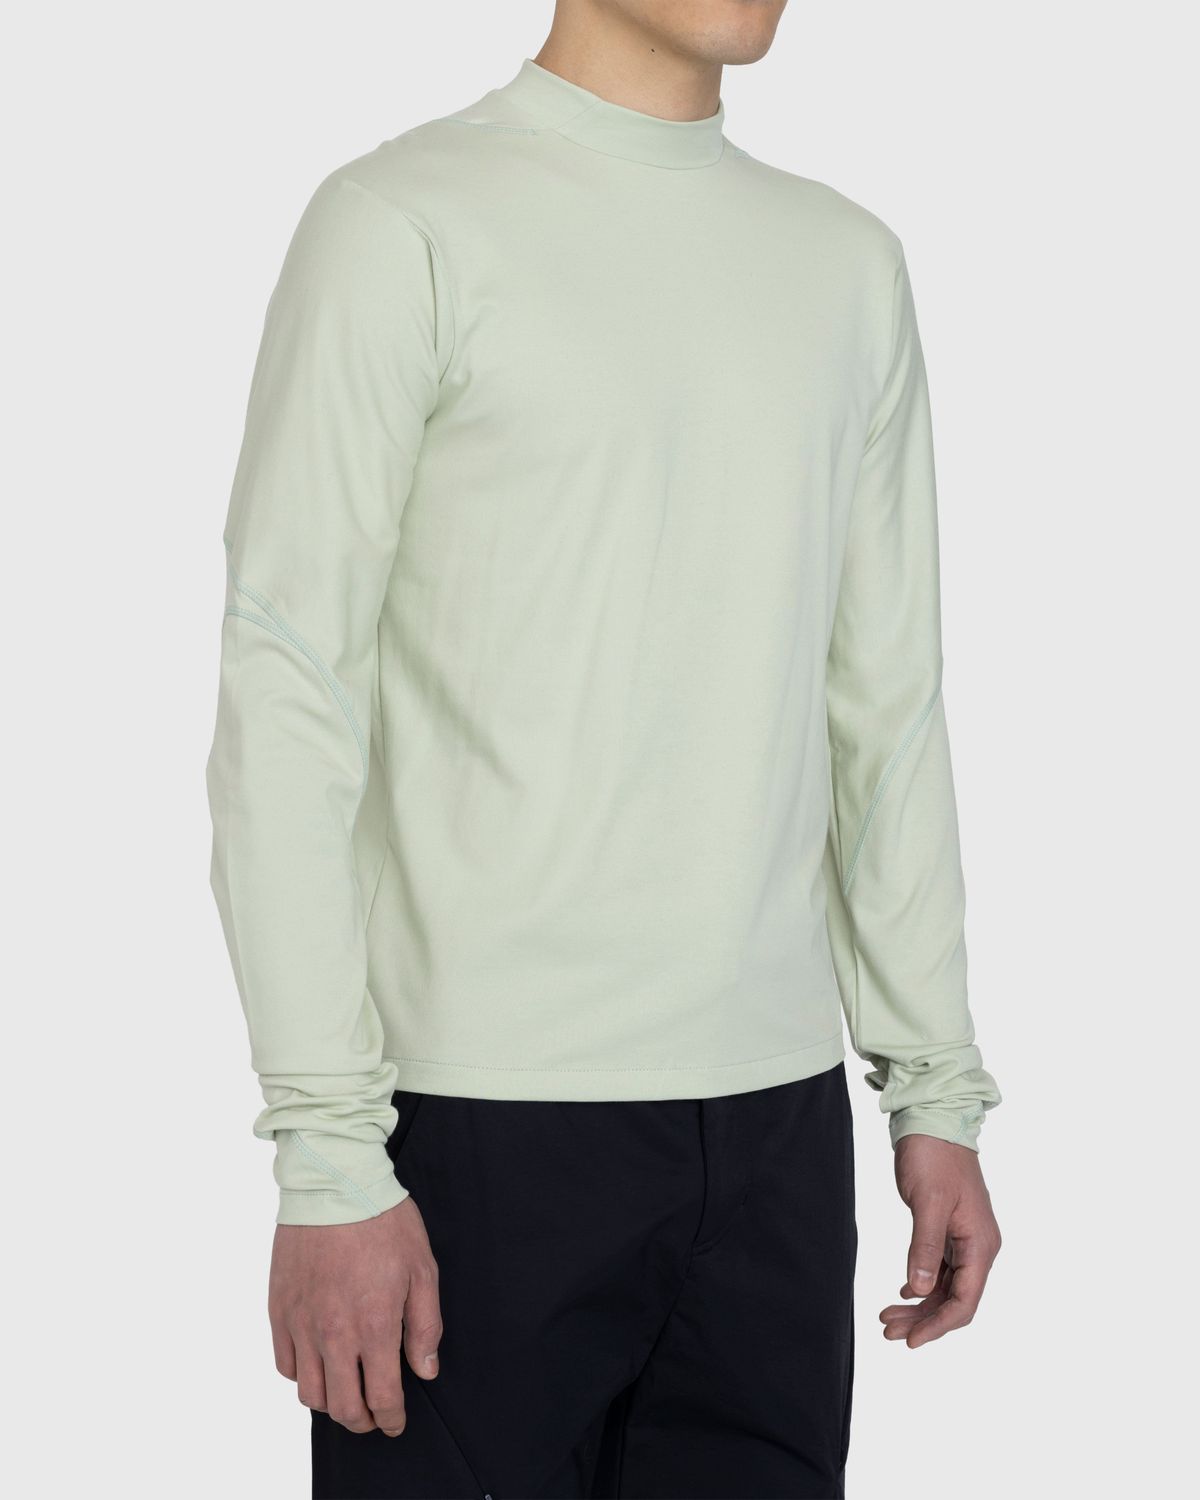 Post Archive Faction (PAF) – 5.0 Longsleeve Right Shirt Lime - Longsleeves - Green - Image 3